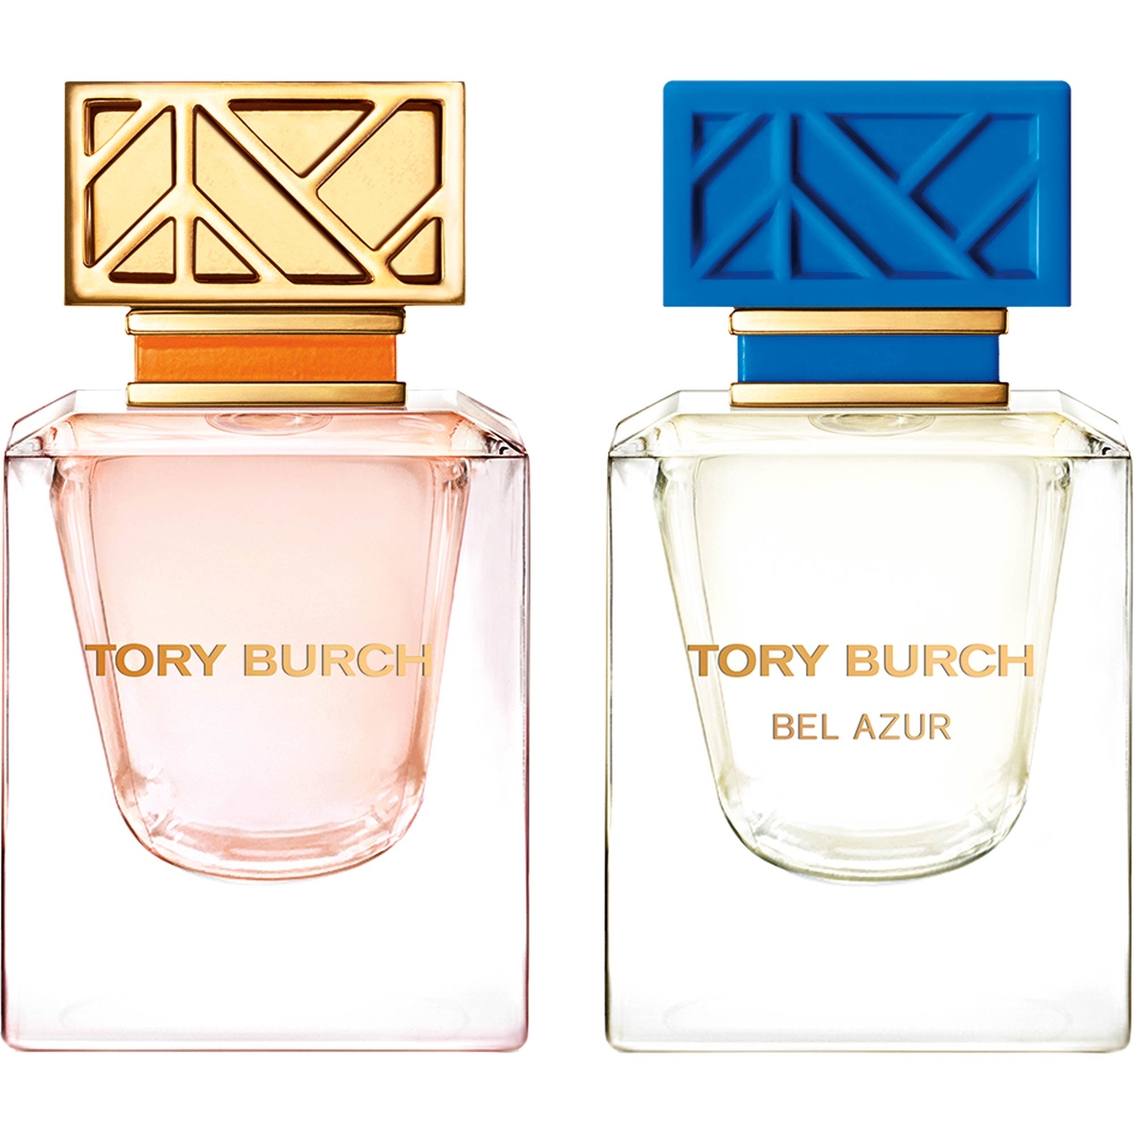 Tory Burch Deluxe Mini Duo Gift Set | Gifts Sets For Her | Beauty & Health  | Shop The Exchange